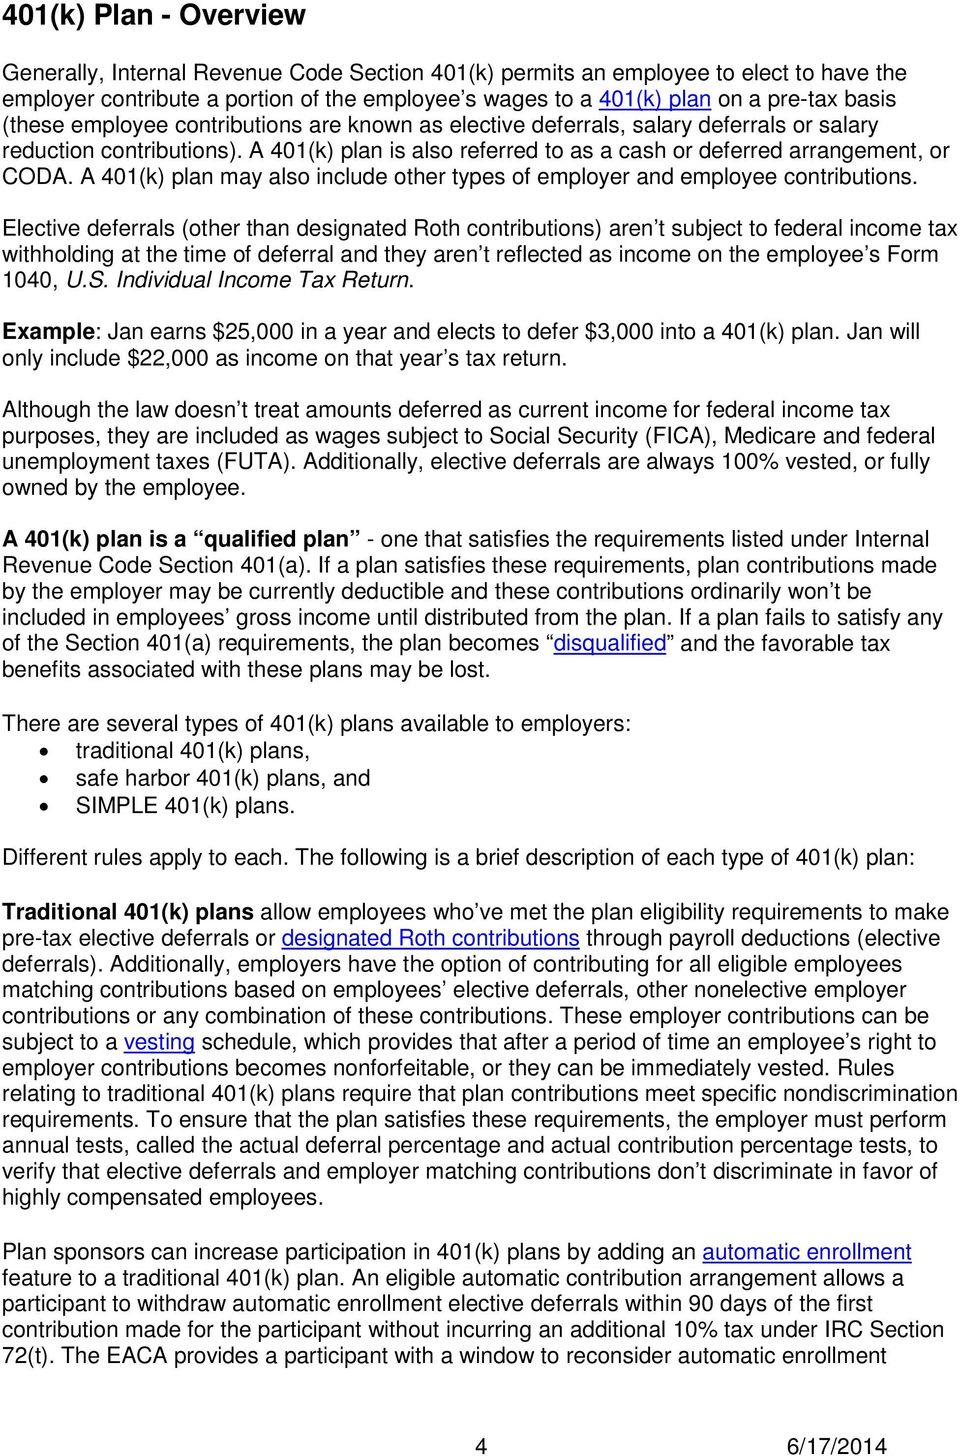 Sample 401K Letter To Employees from docplayer.net